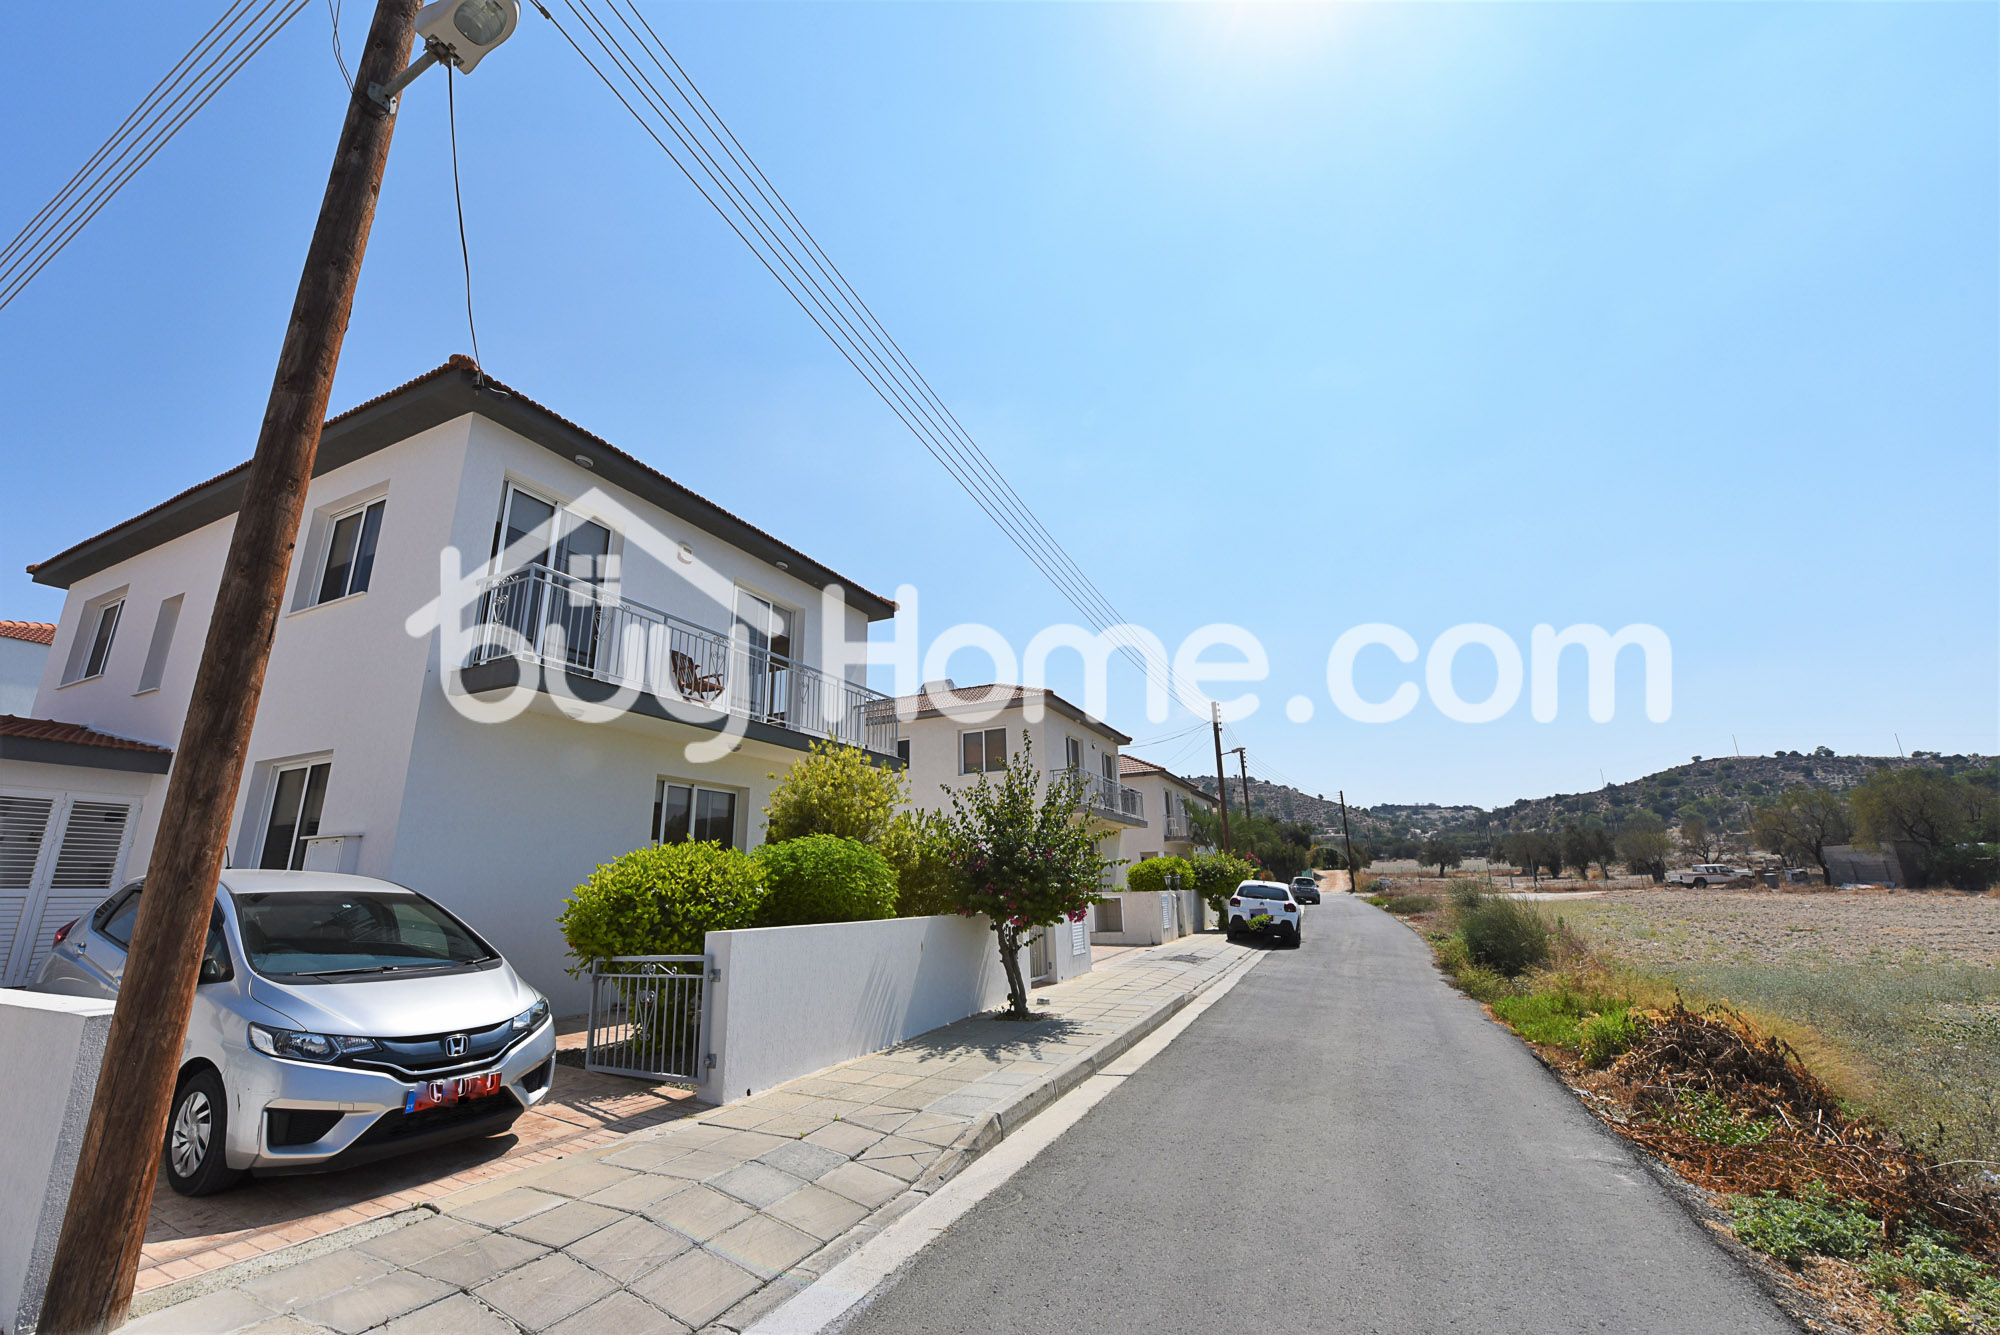 4 Bedroom House with Pool | BuyHome